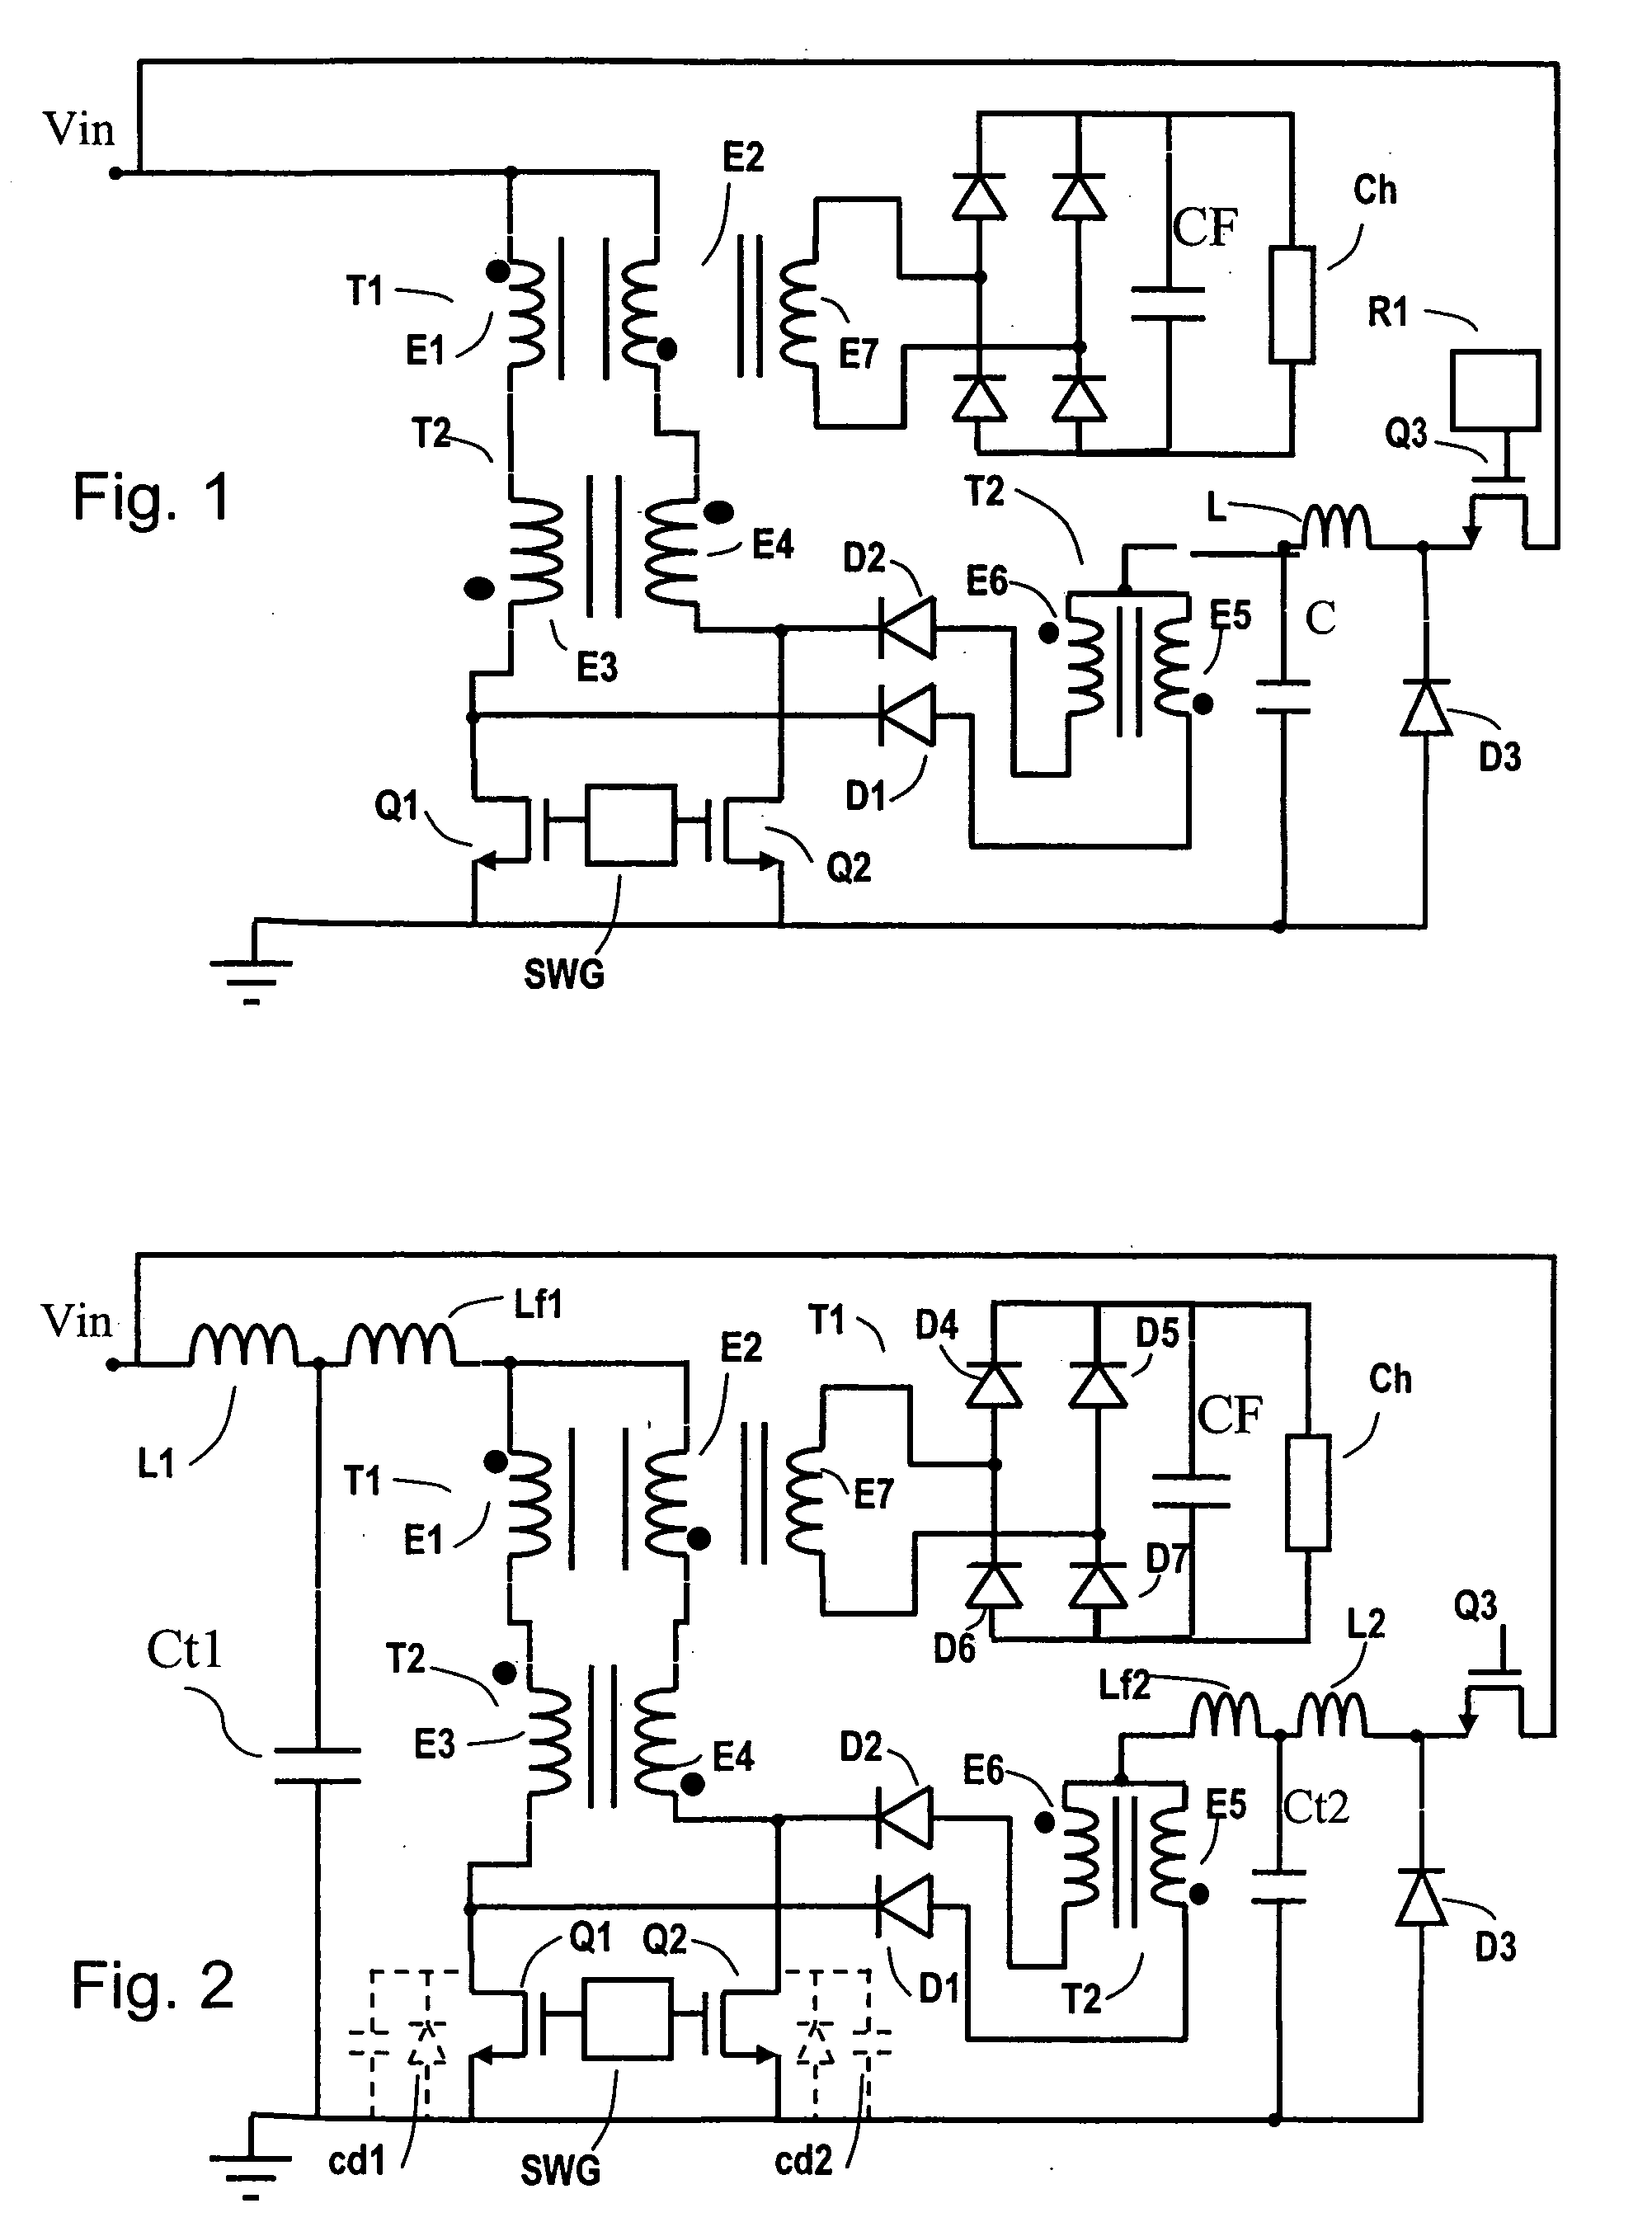 Voltage regulator converter without switching losses